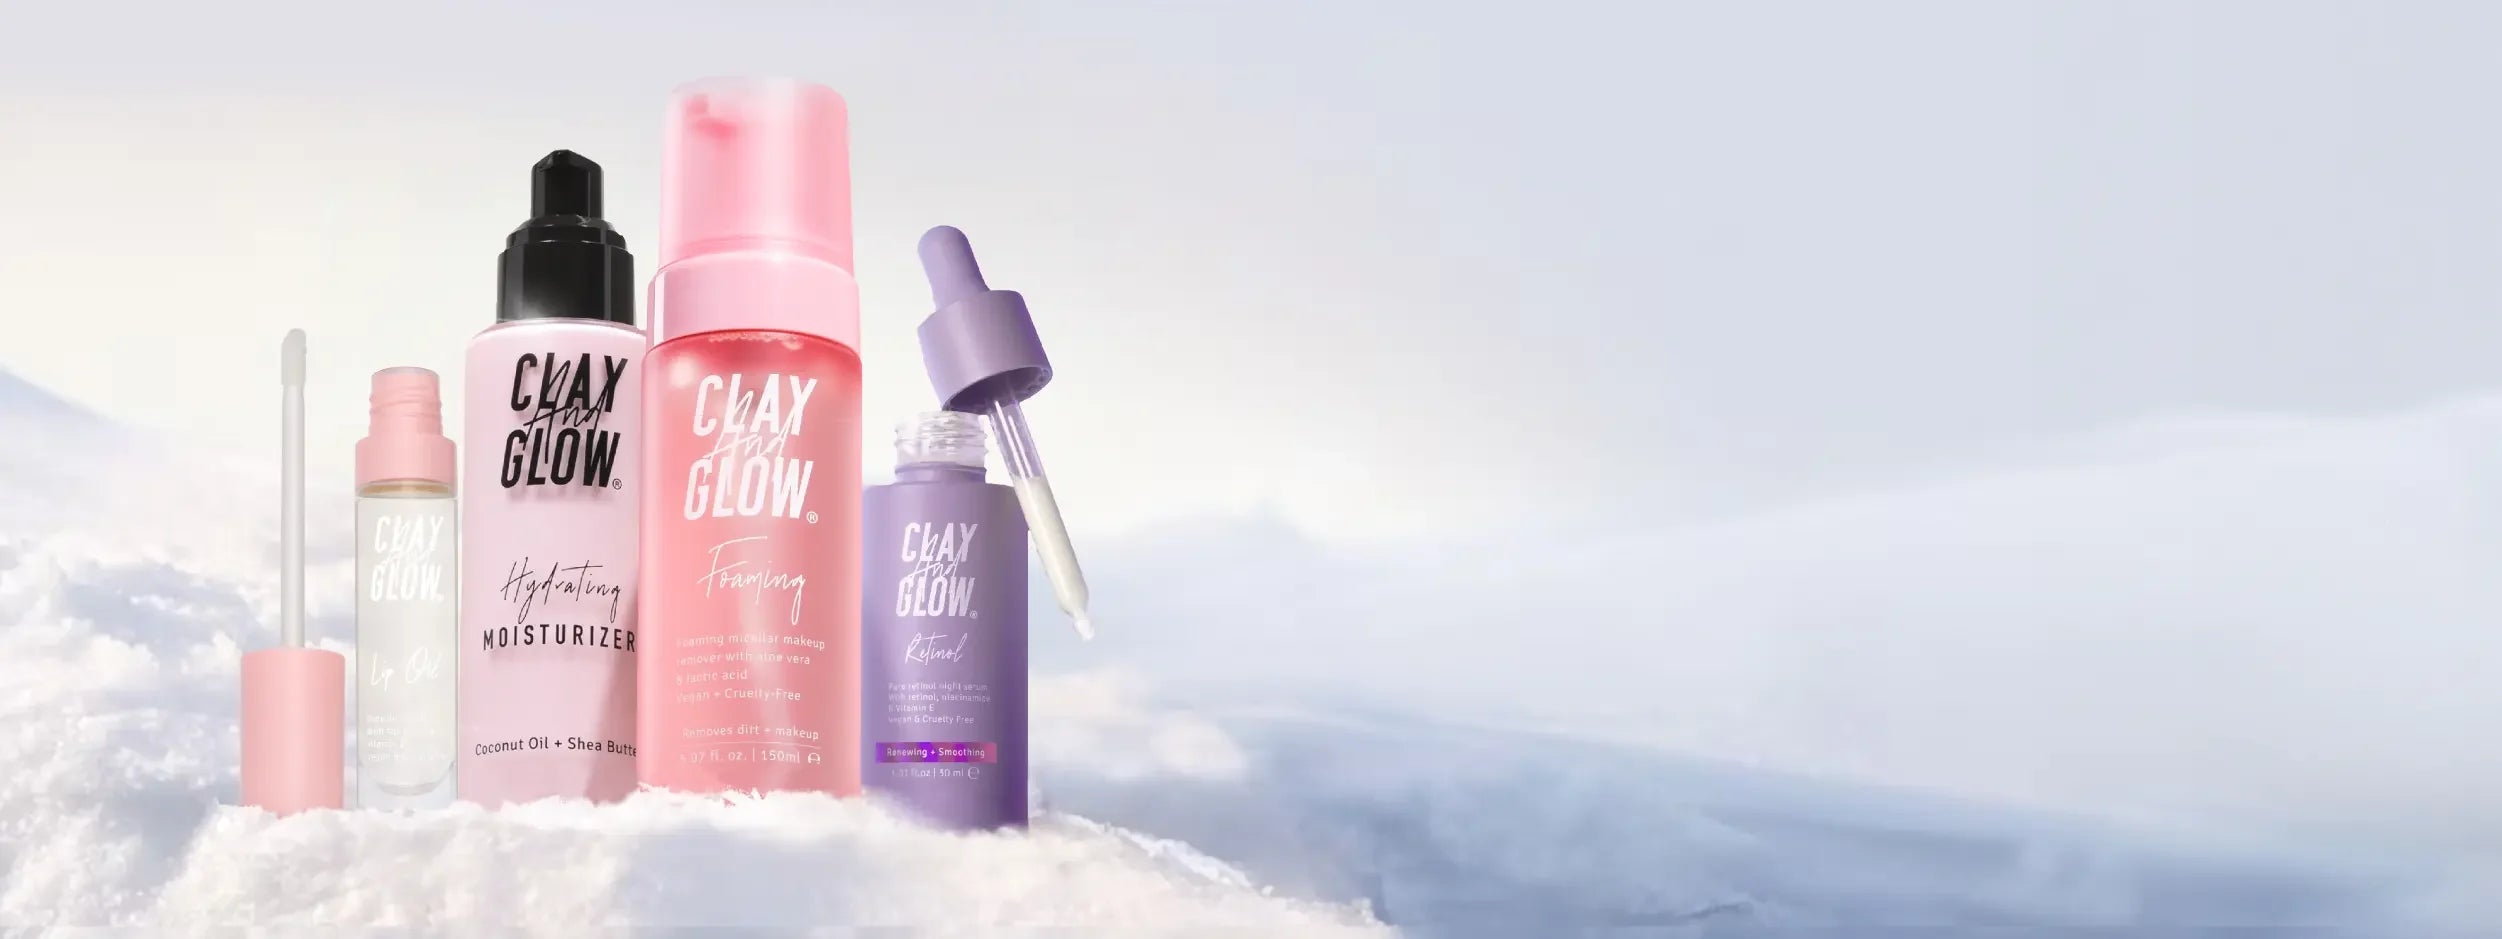 Clay And Glow's Winter Set helps your skin get through the winter